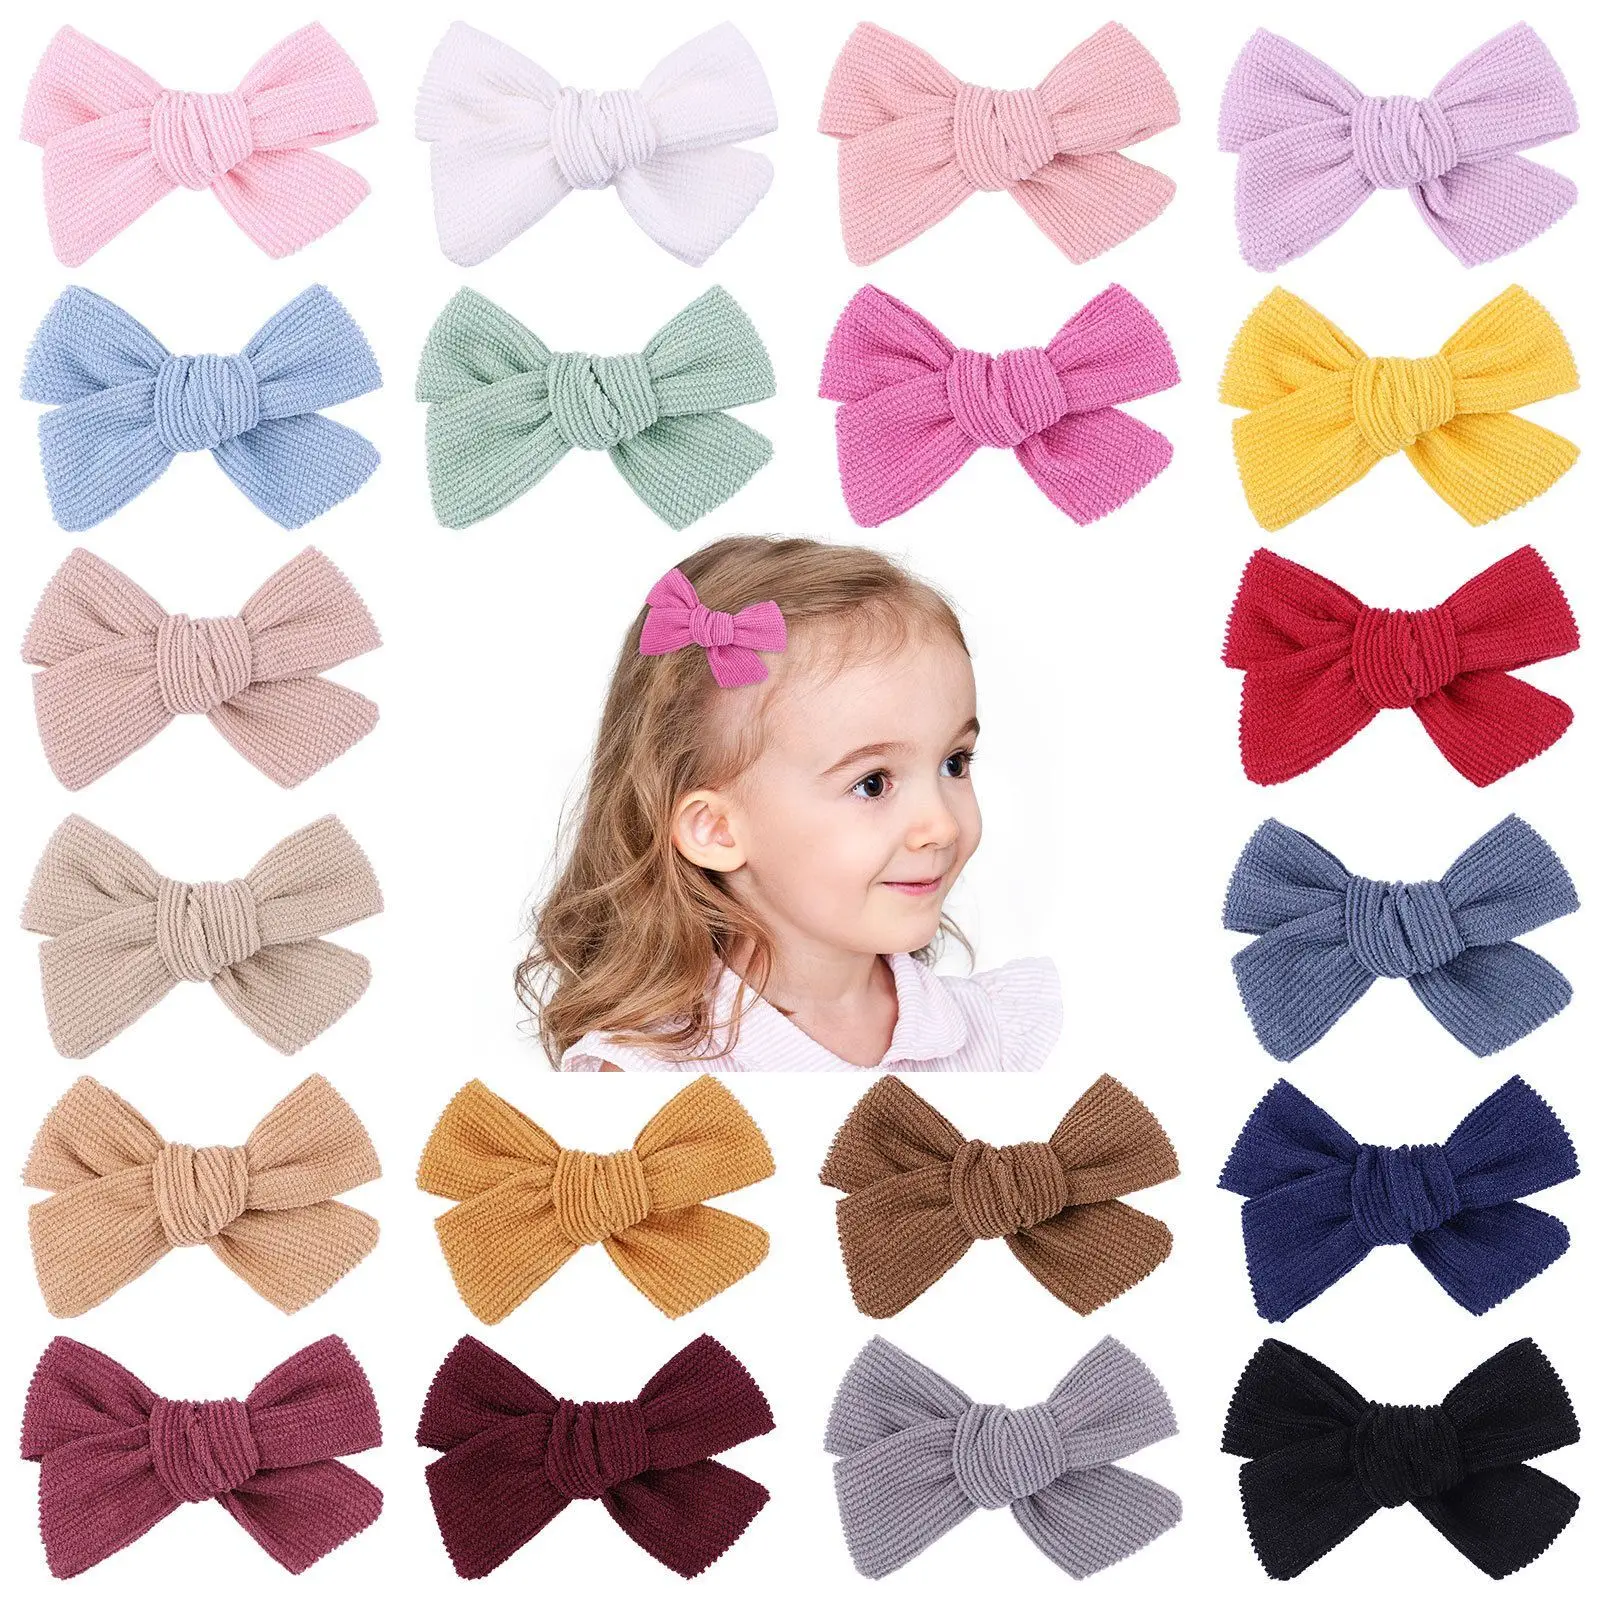 

50 Pcs/Lot,3 Inch Fashion Corduroy Hair Bows with Clips Baby Girl Solid Hair Bow Hairpin Newborn Safe Barrettes Kids Accessories